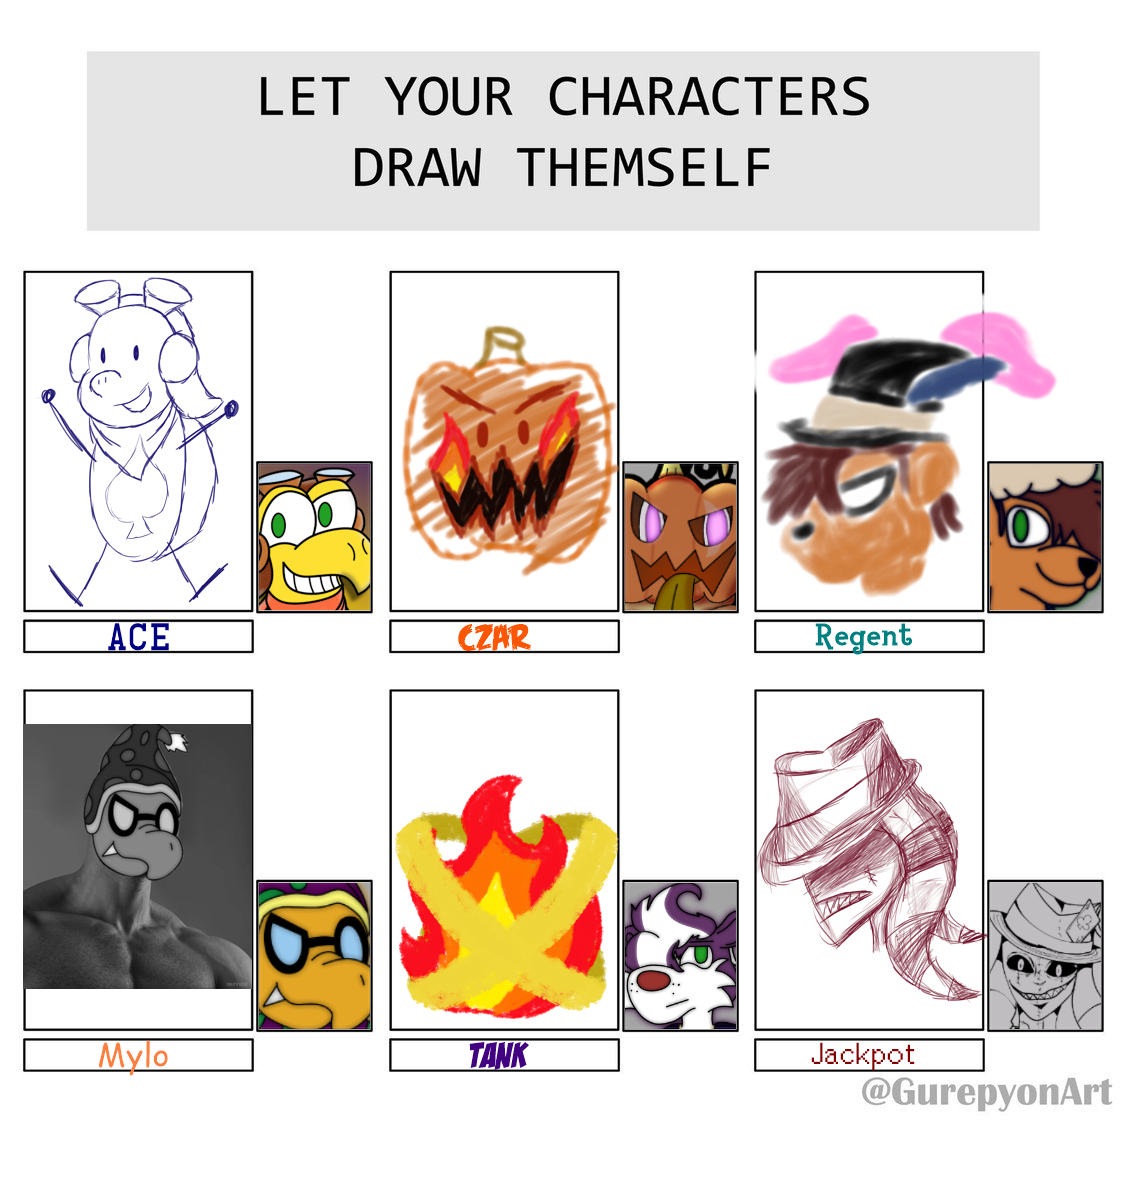 Let Me Draw Your OC!